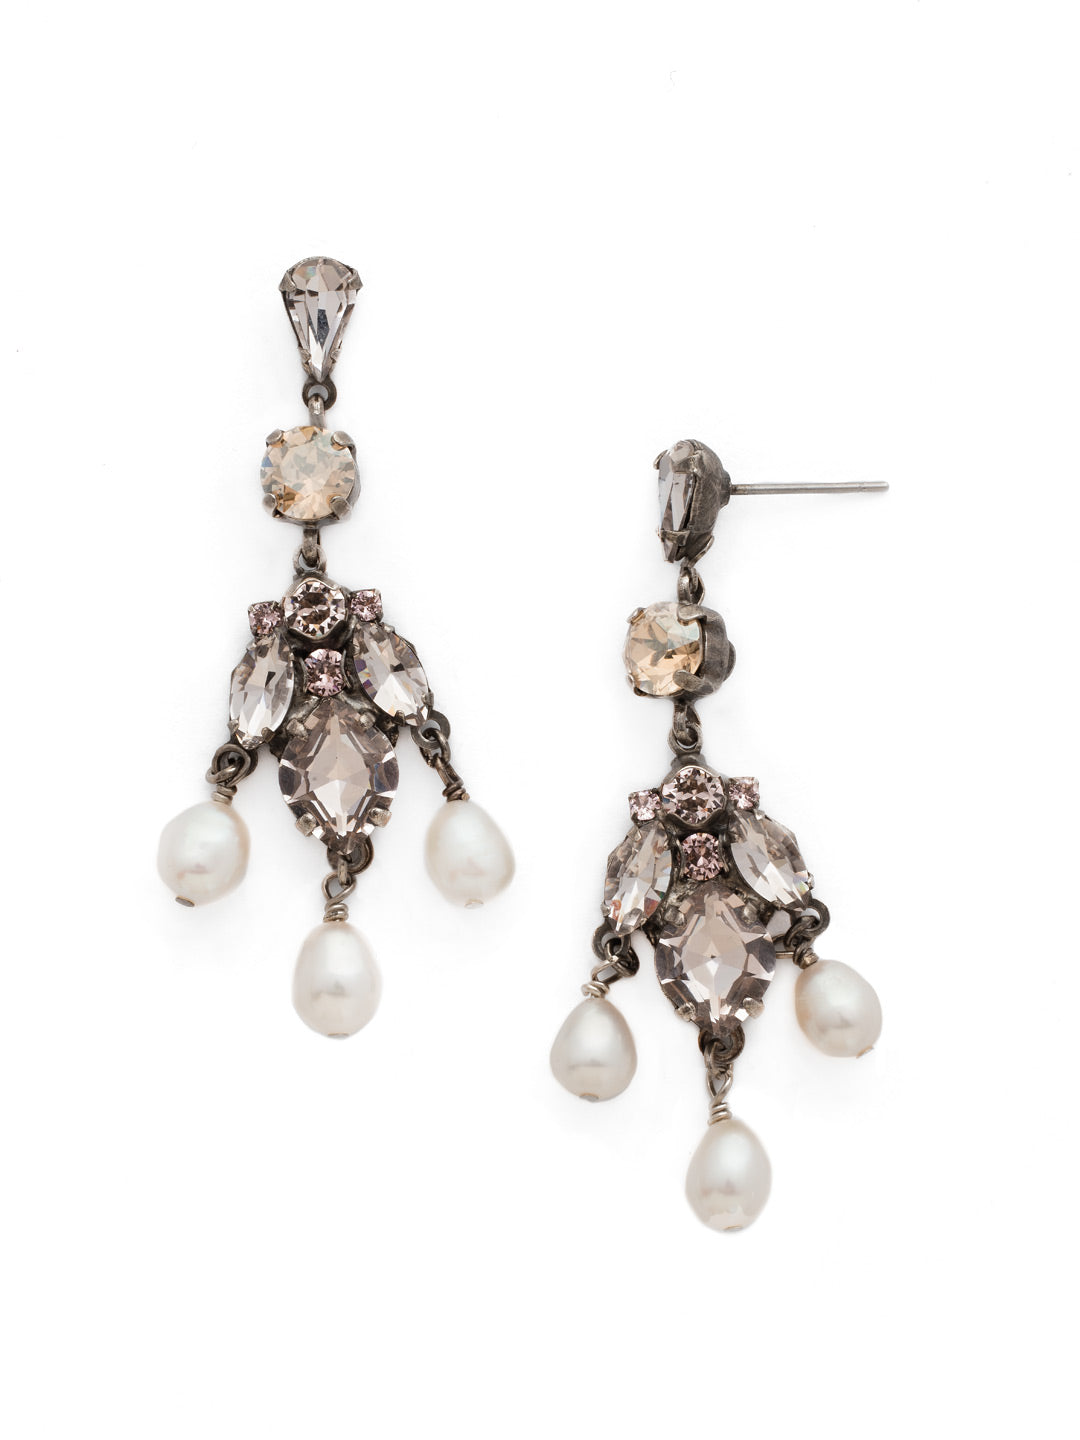 Lumiere Earring - EDP10ASSBL - Light up your look with this dazzling chandelier design that incorporates elegant accent pearls for classic charm.